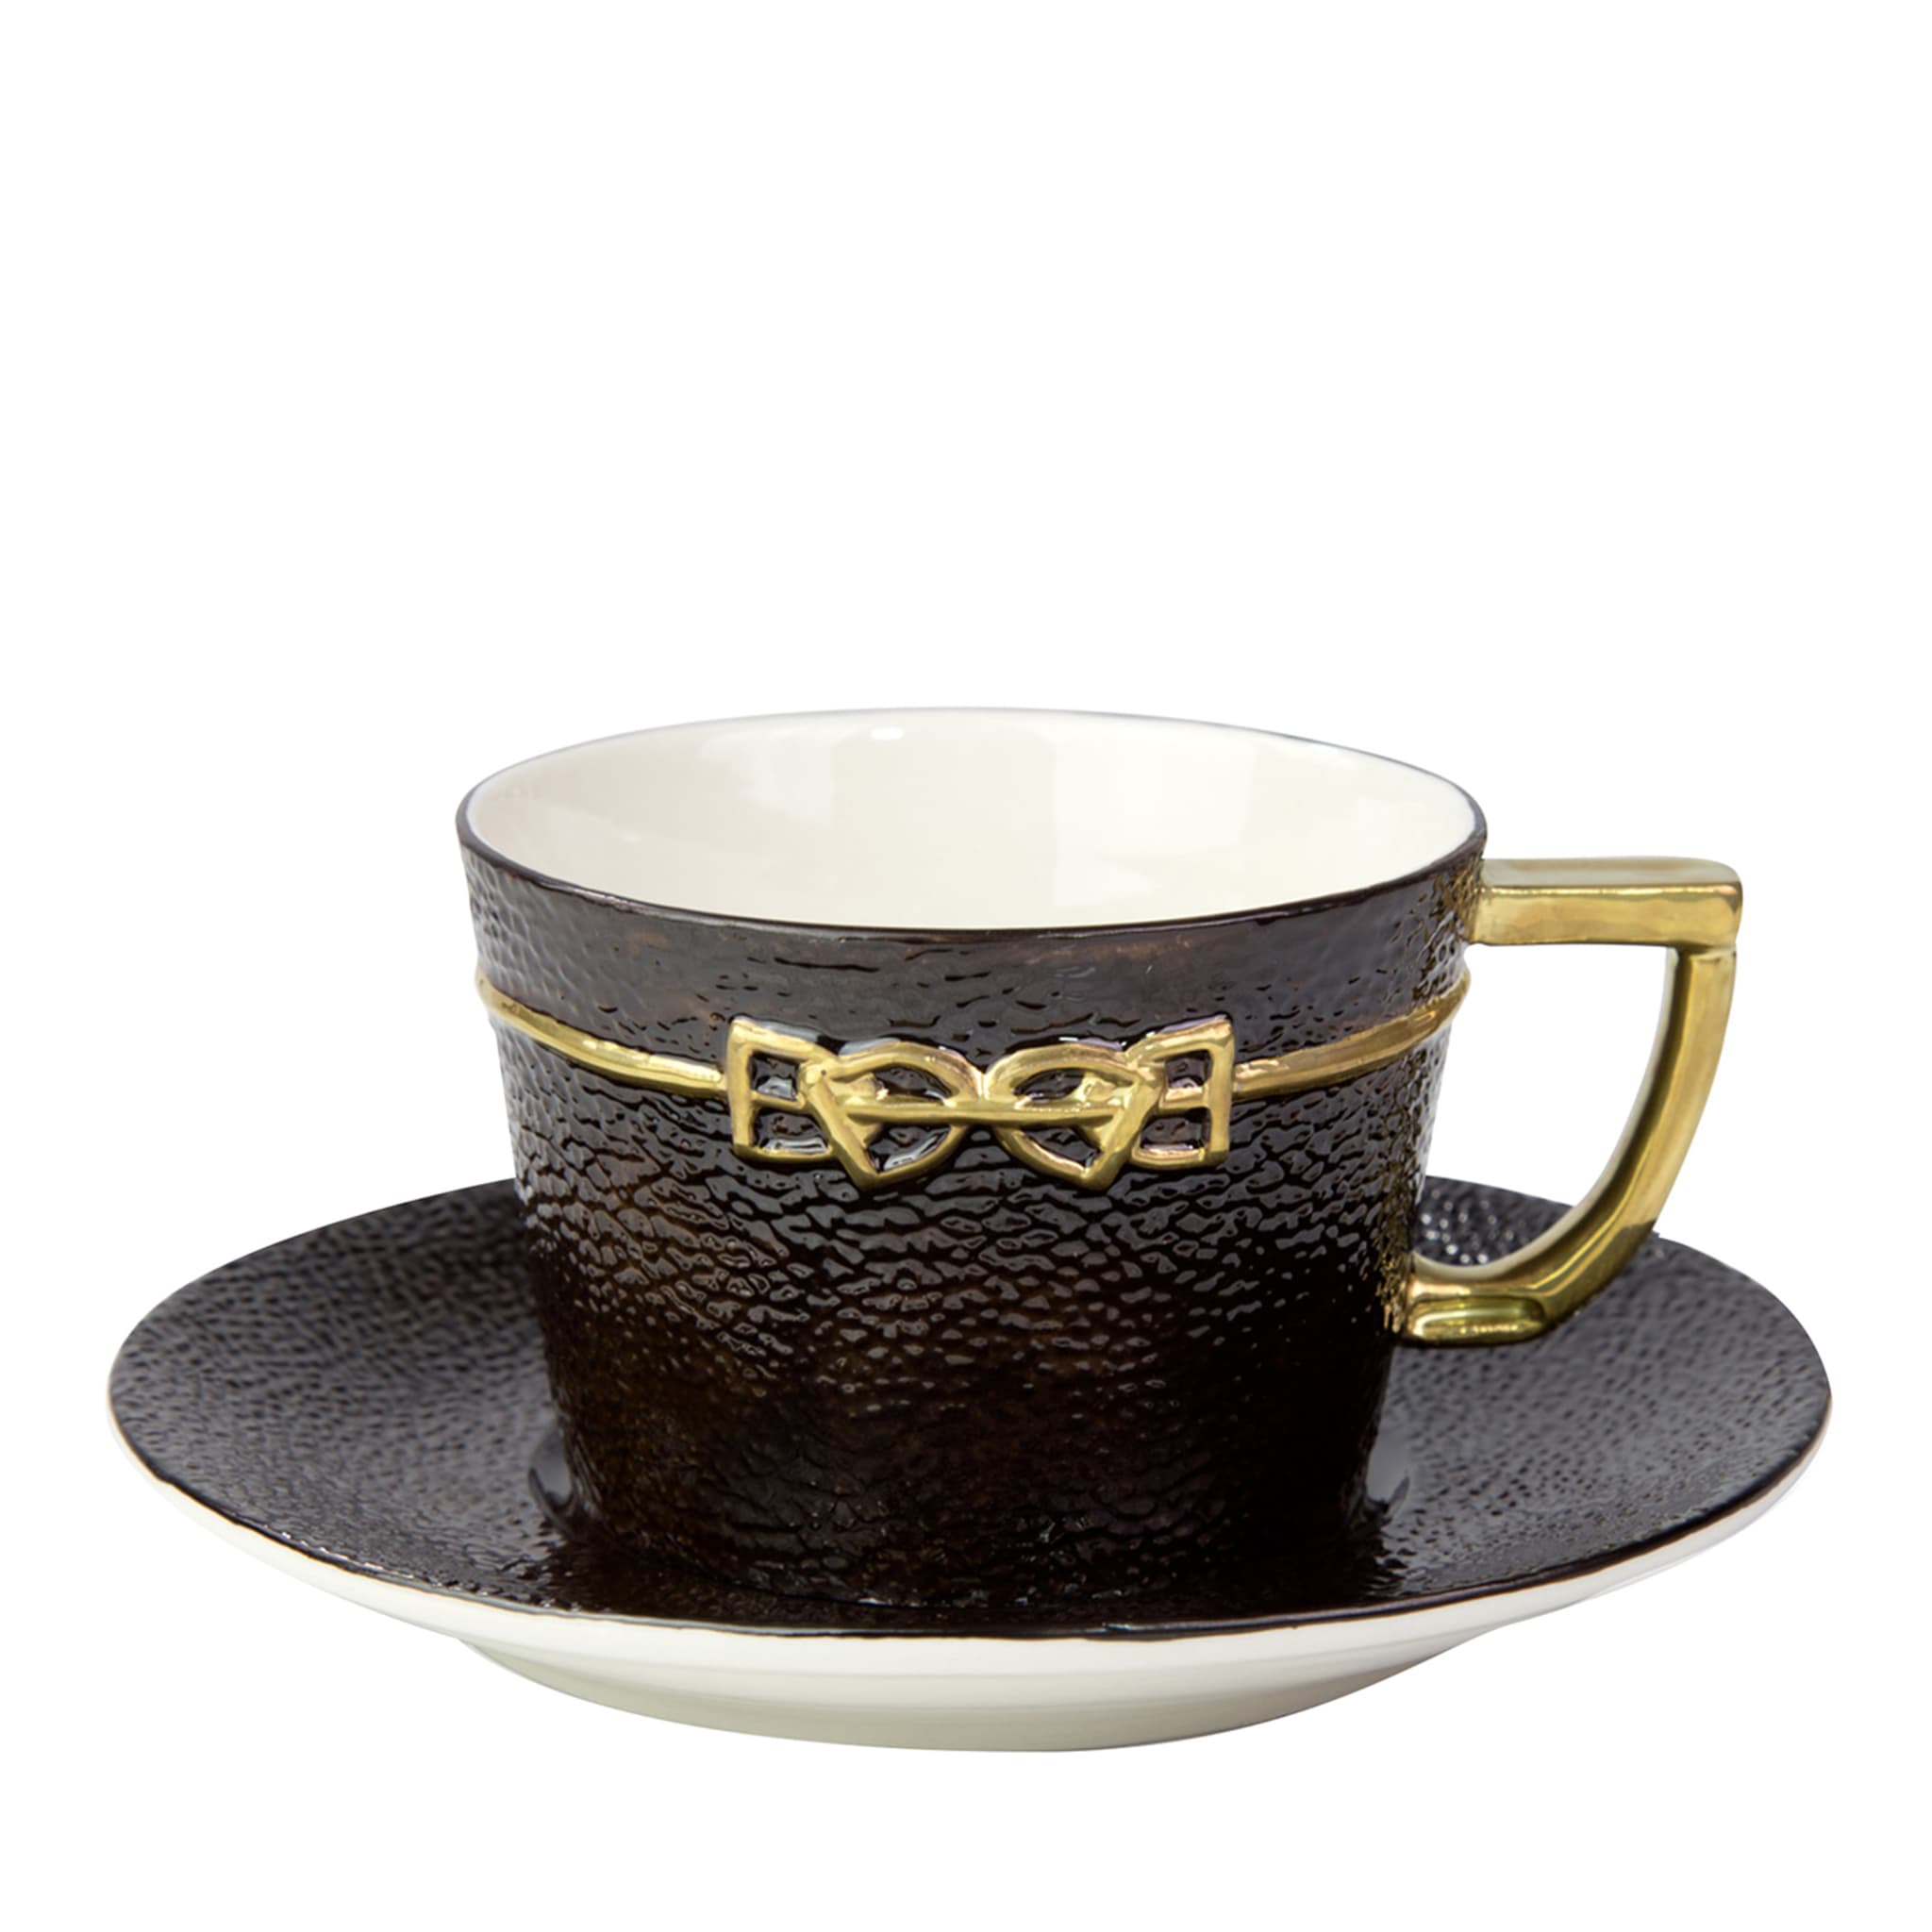 DRESSAGE TEA CUP AND SAUCER - BLACK AND GOLD - Main view